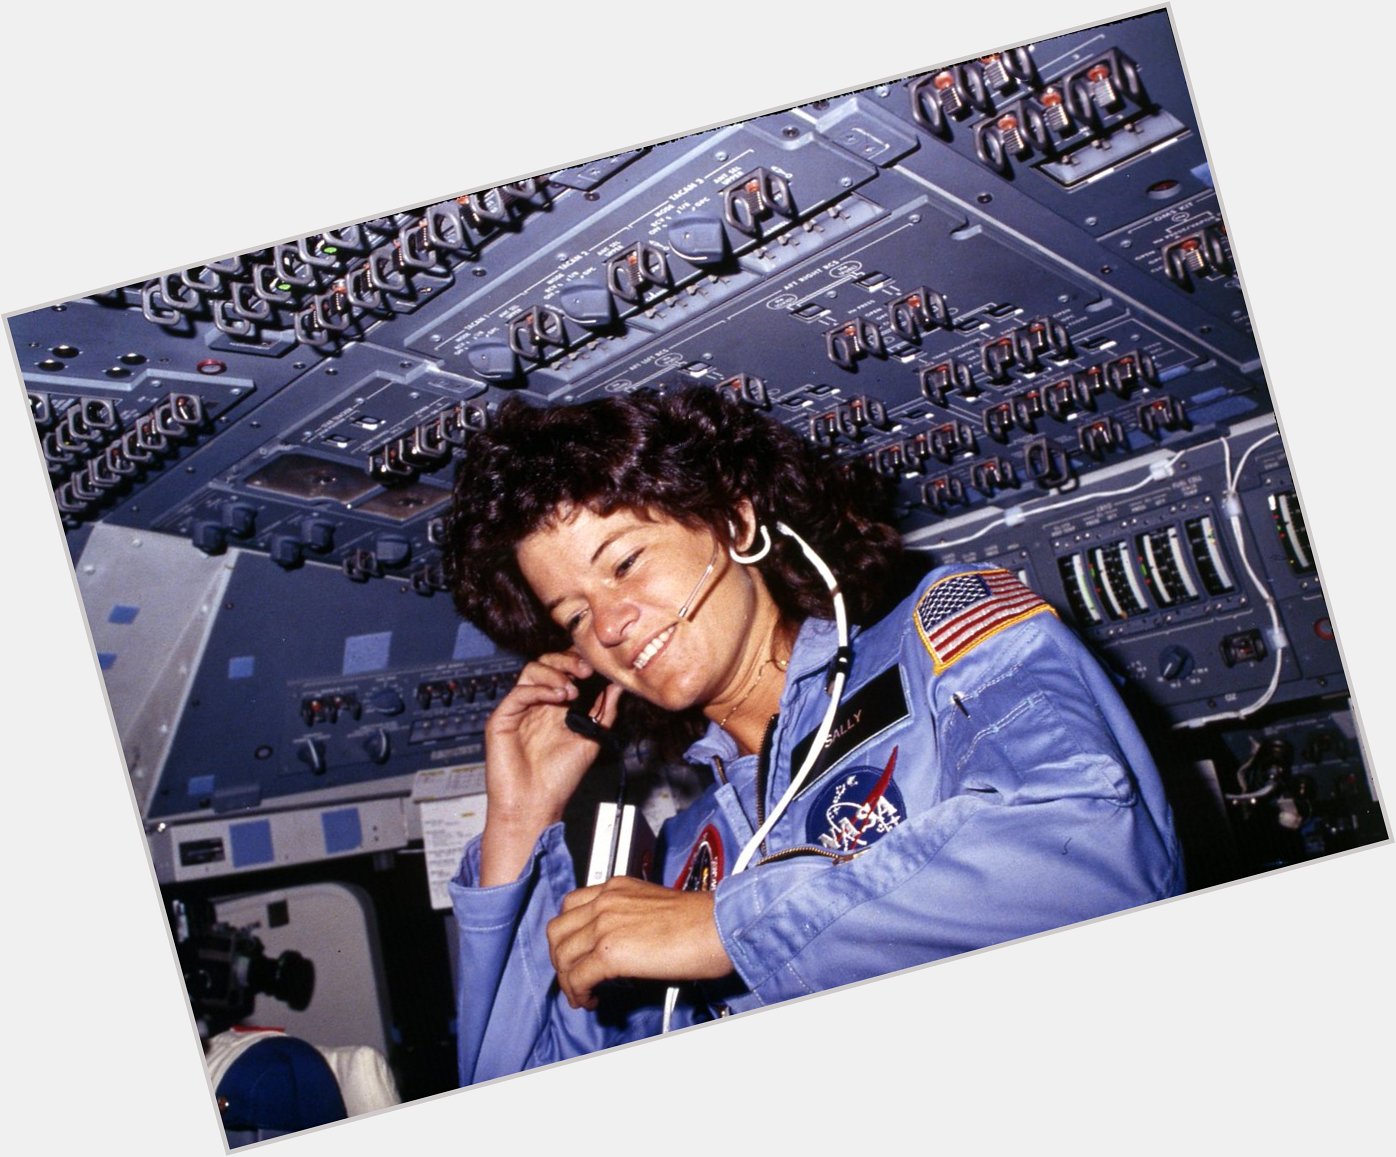 Happy birthday to the first American woman in space, Sally Ride. You\ve always shined amongst our stars. 